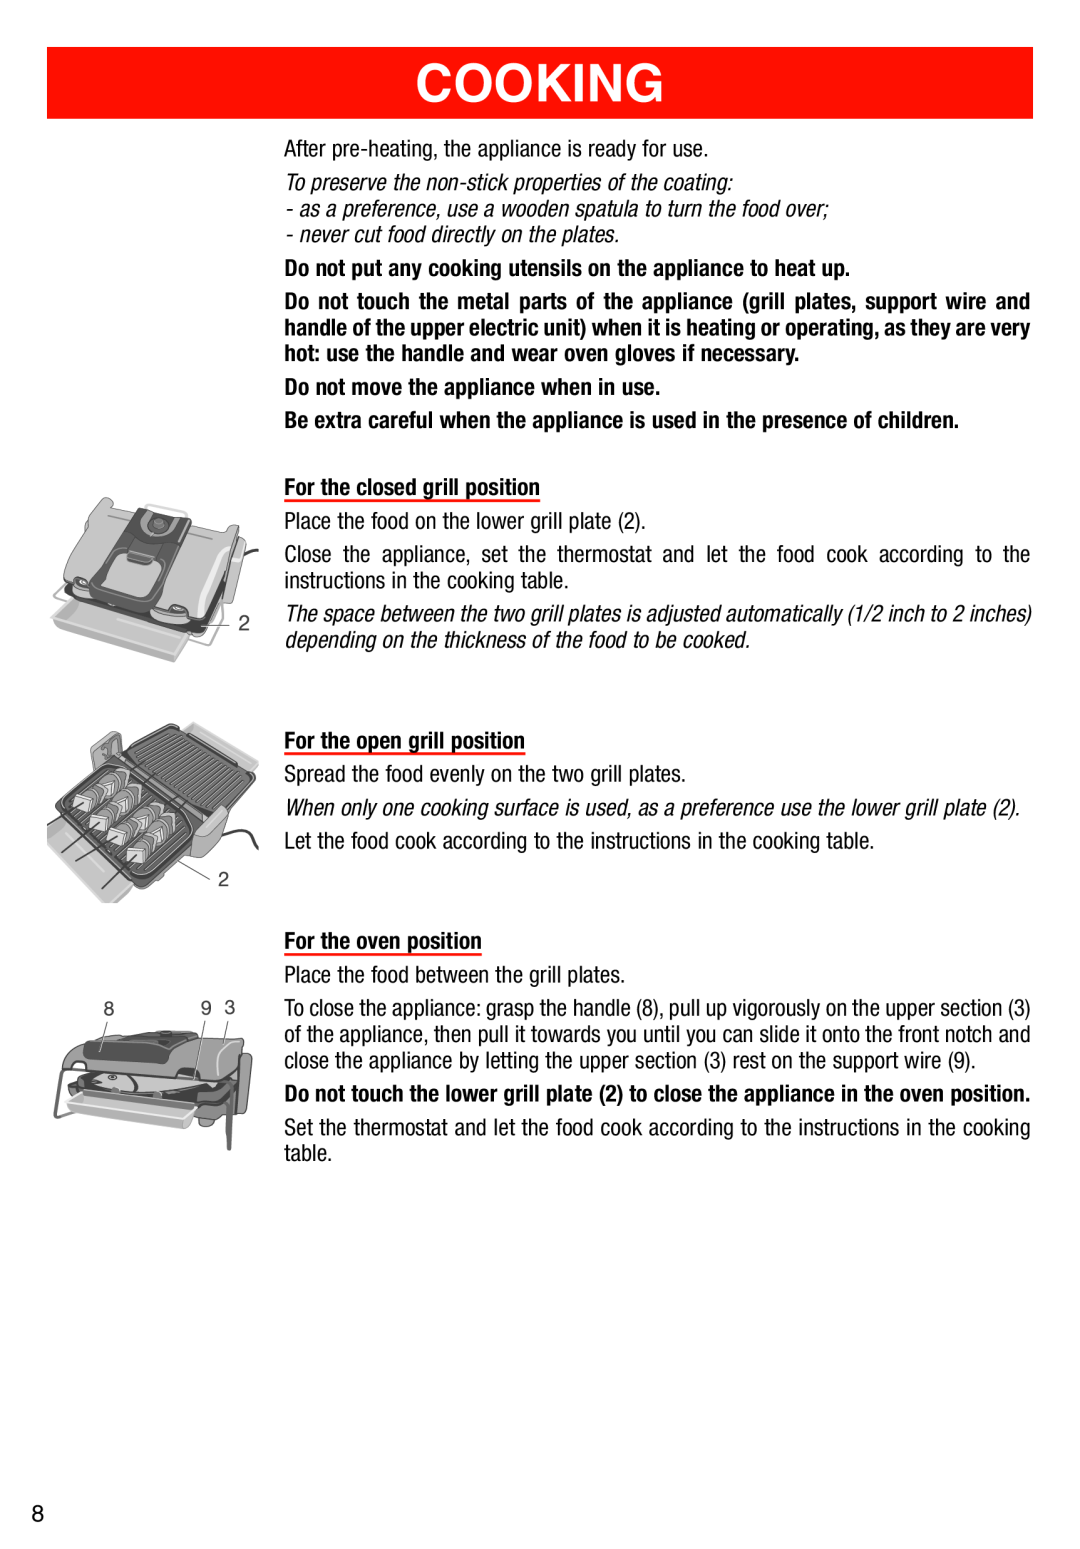 T-Fal Use Grill & Panini Maker manual Cooking, After pre-heating, the appliance is ready for use 